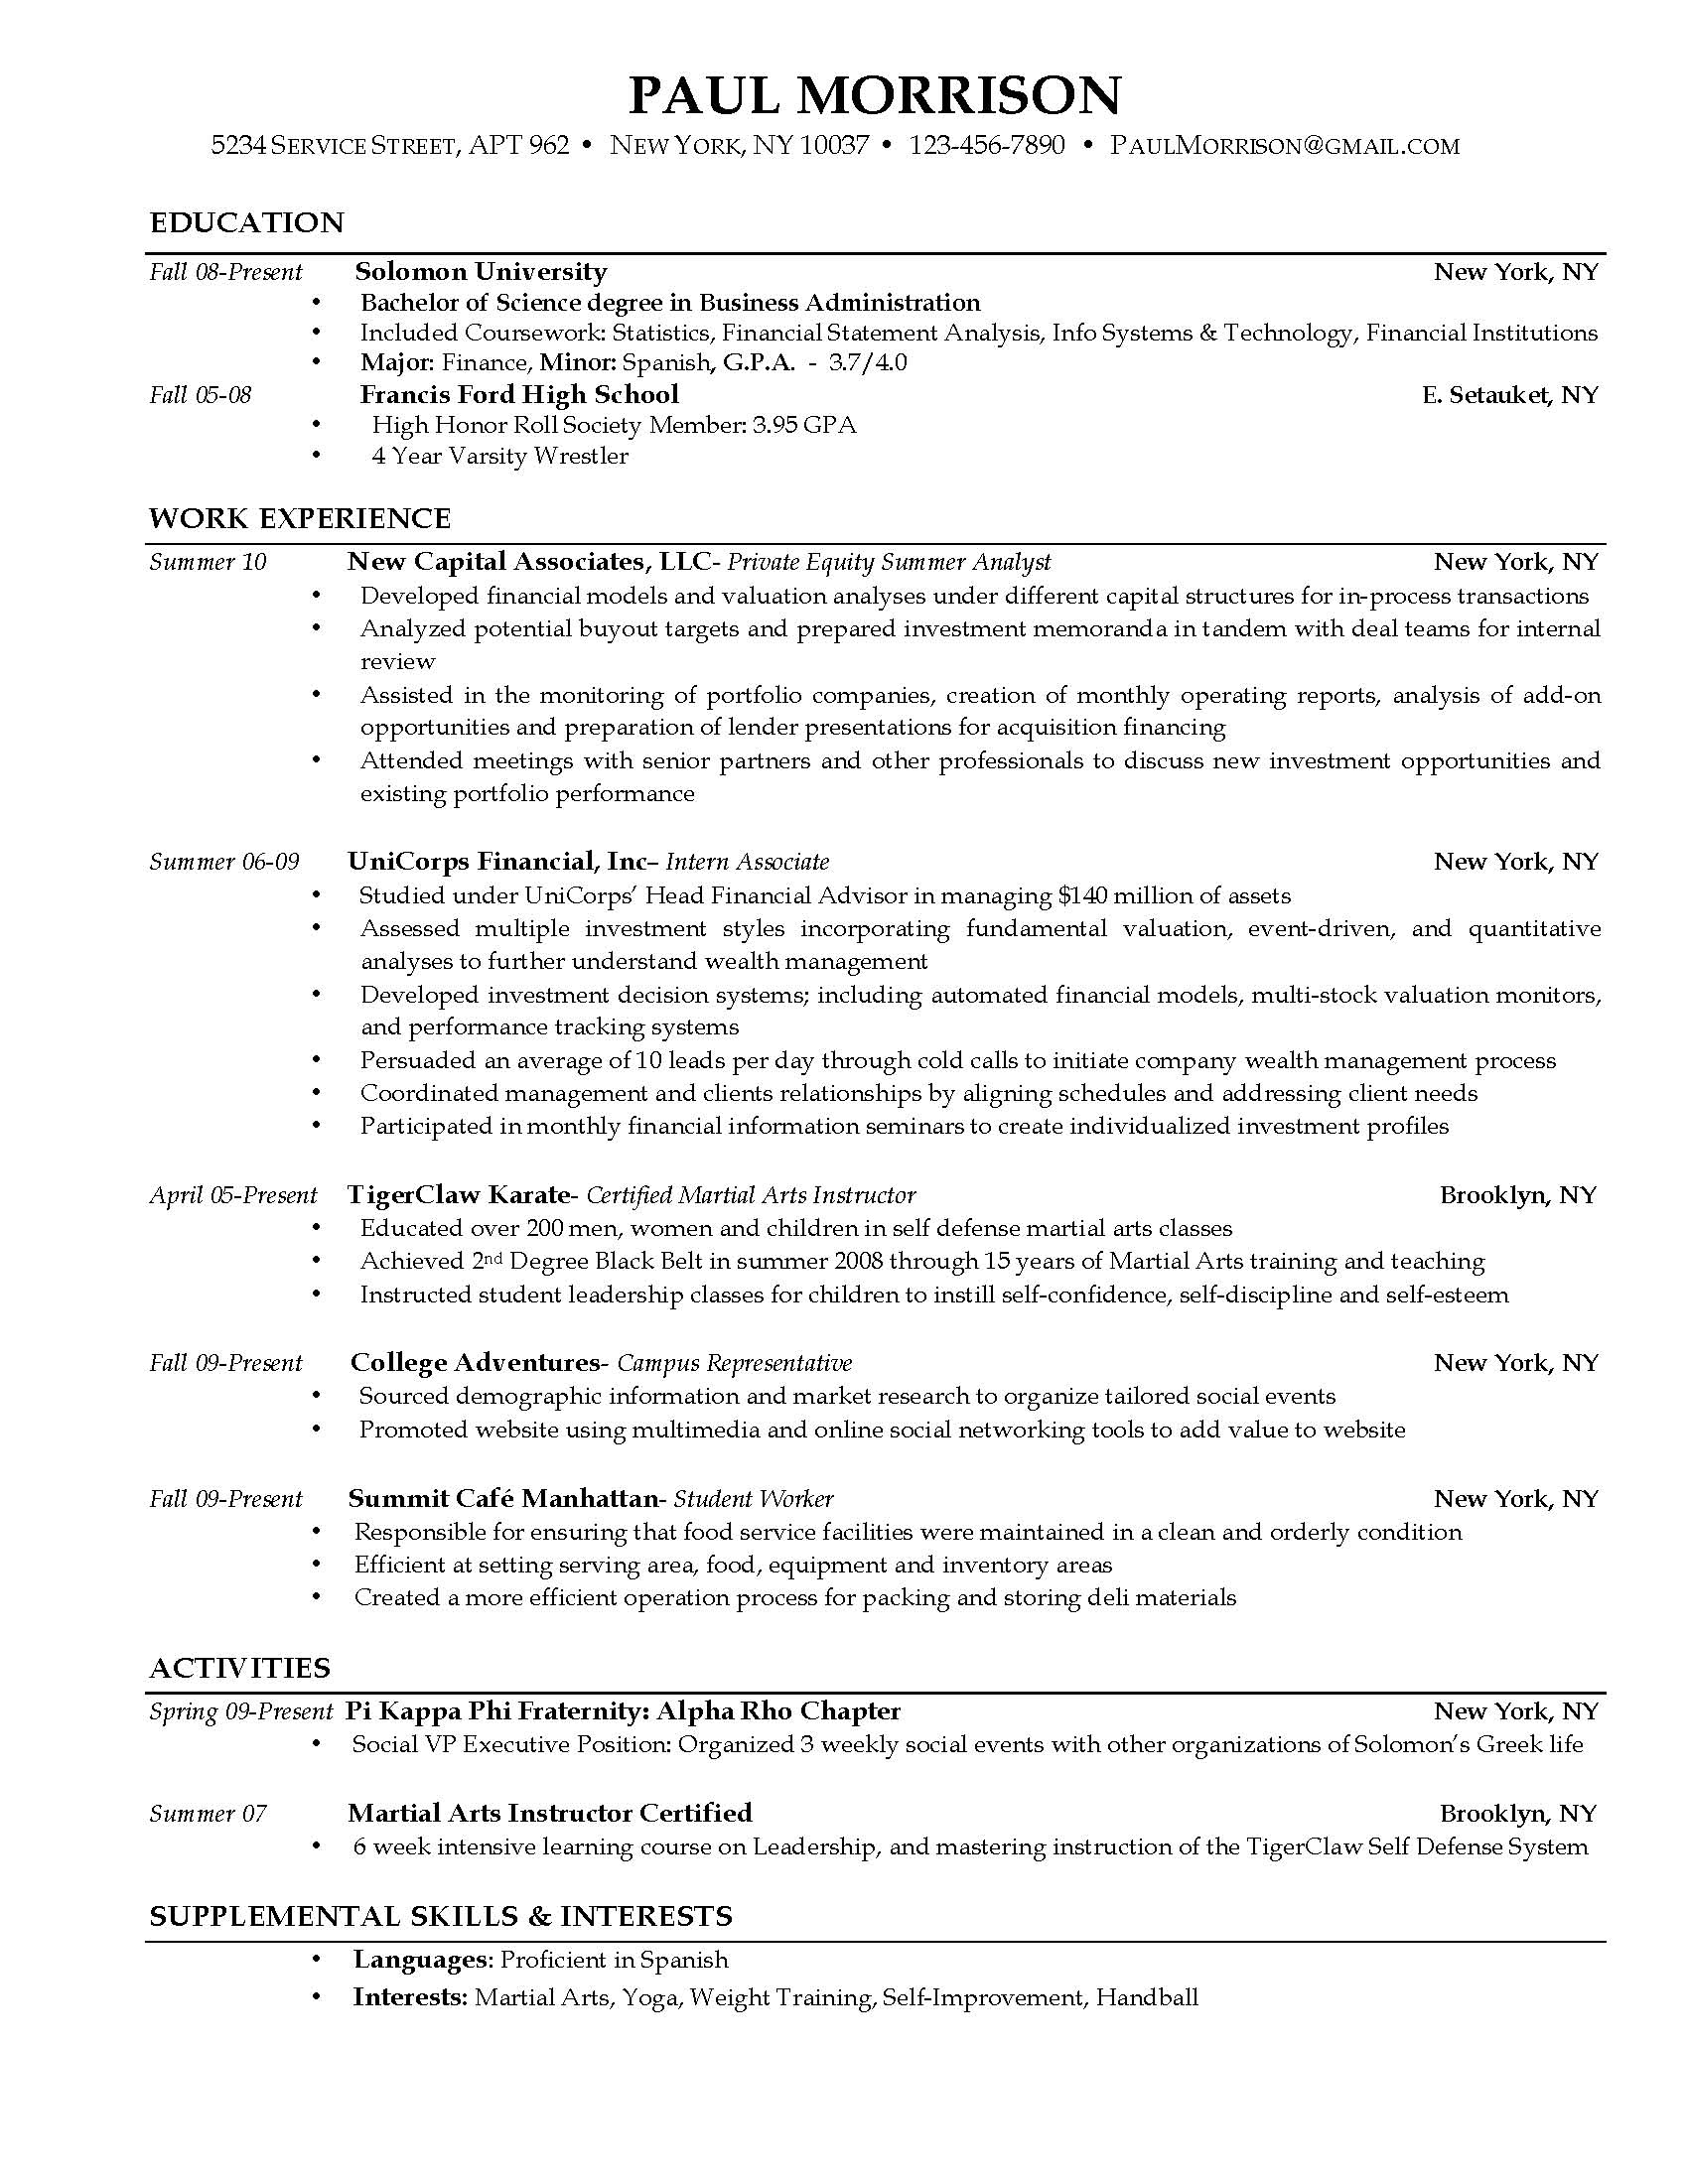 Resume Examples College Student 